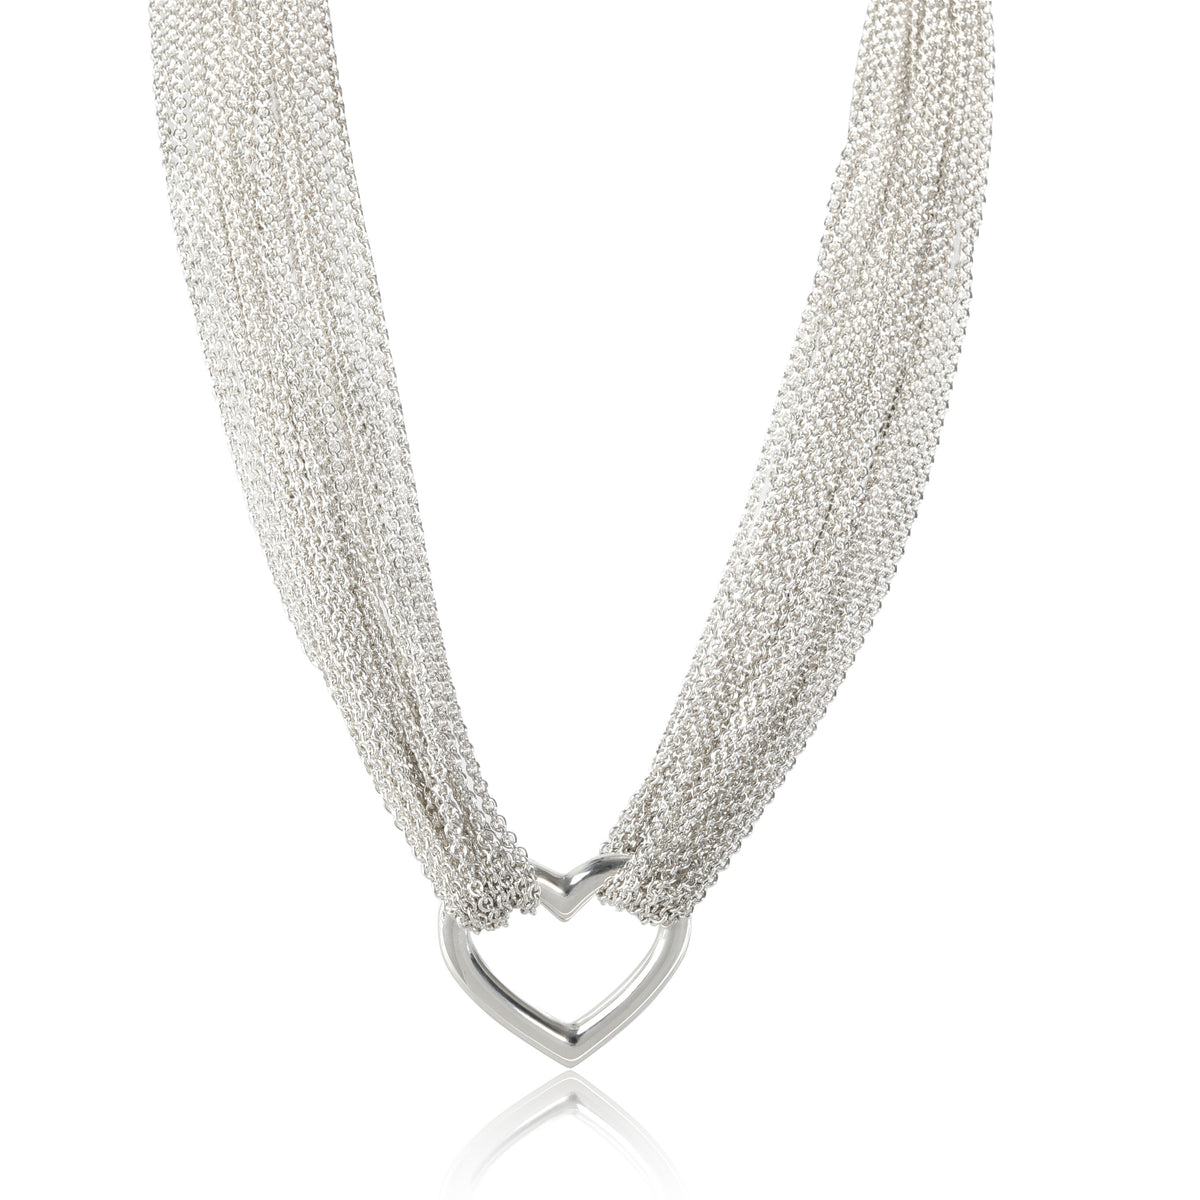 Tiffany & Co. Multi-strand Heart Necklace in Sterling Silver